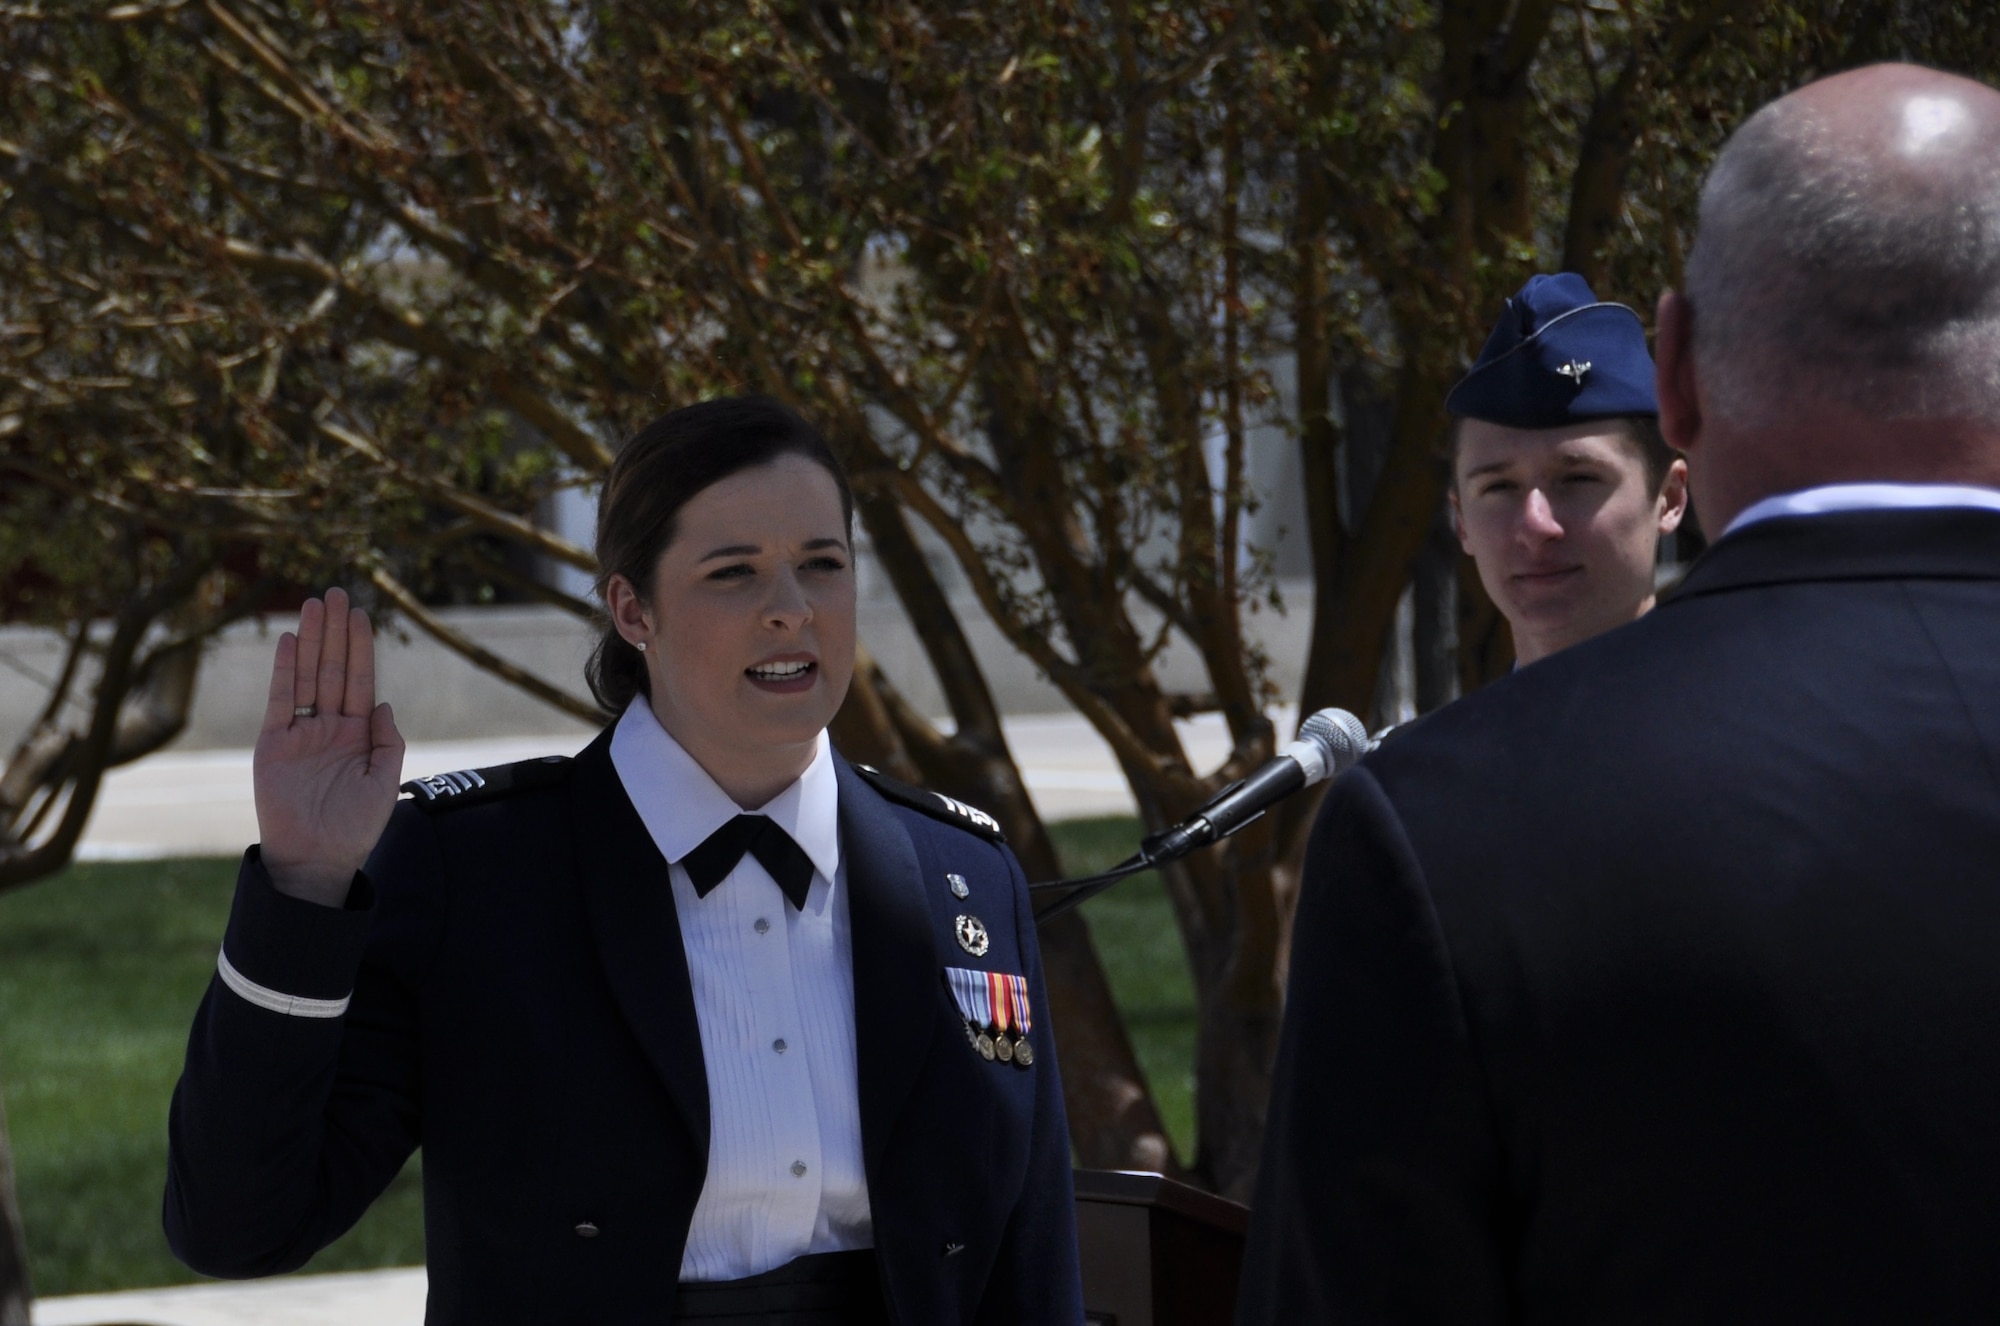 Cadet (now 2nd Lt.) Krista Kelly takes her oath of office during a commissioning ceremony May 23, 2017 at the U.S. Air Force Academy. Kelly's next assignment will be at Travis Air Force Base, Calif. (U.S. Air Force photo/Daniel Butterfield)
